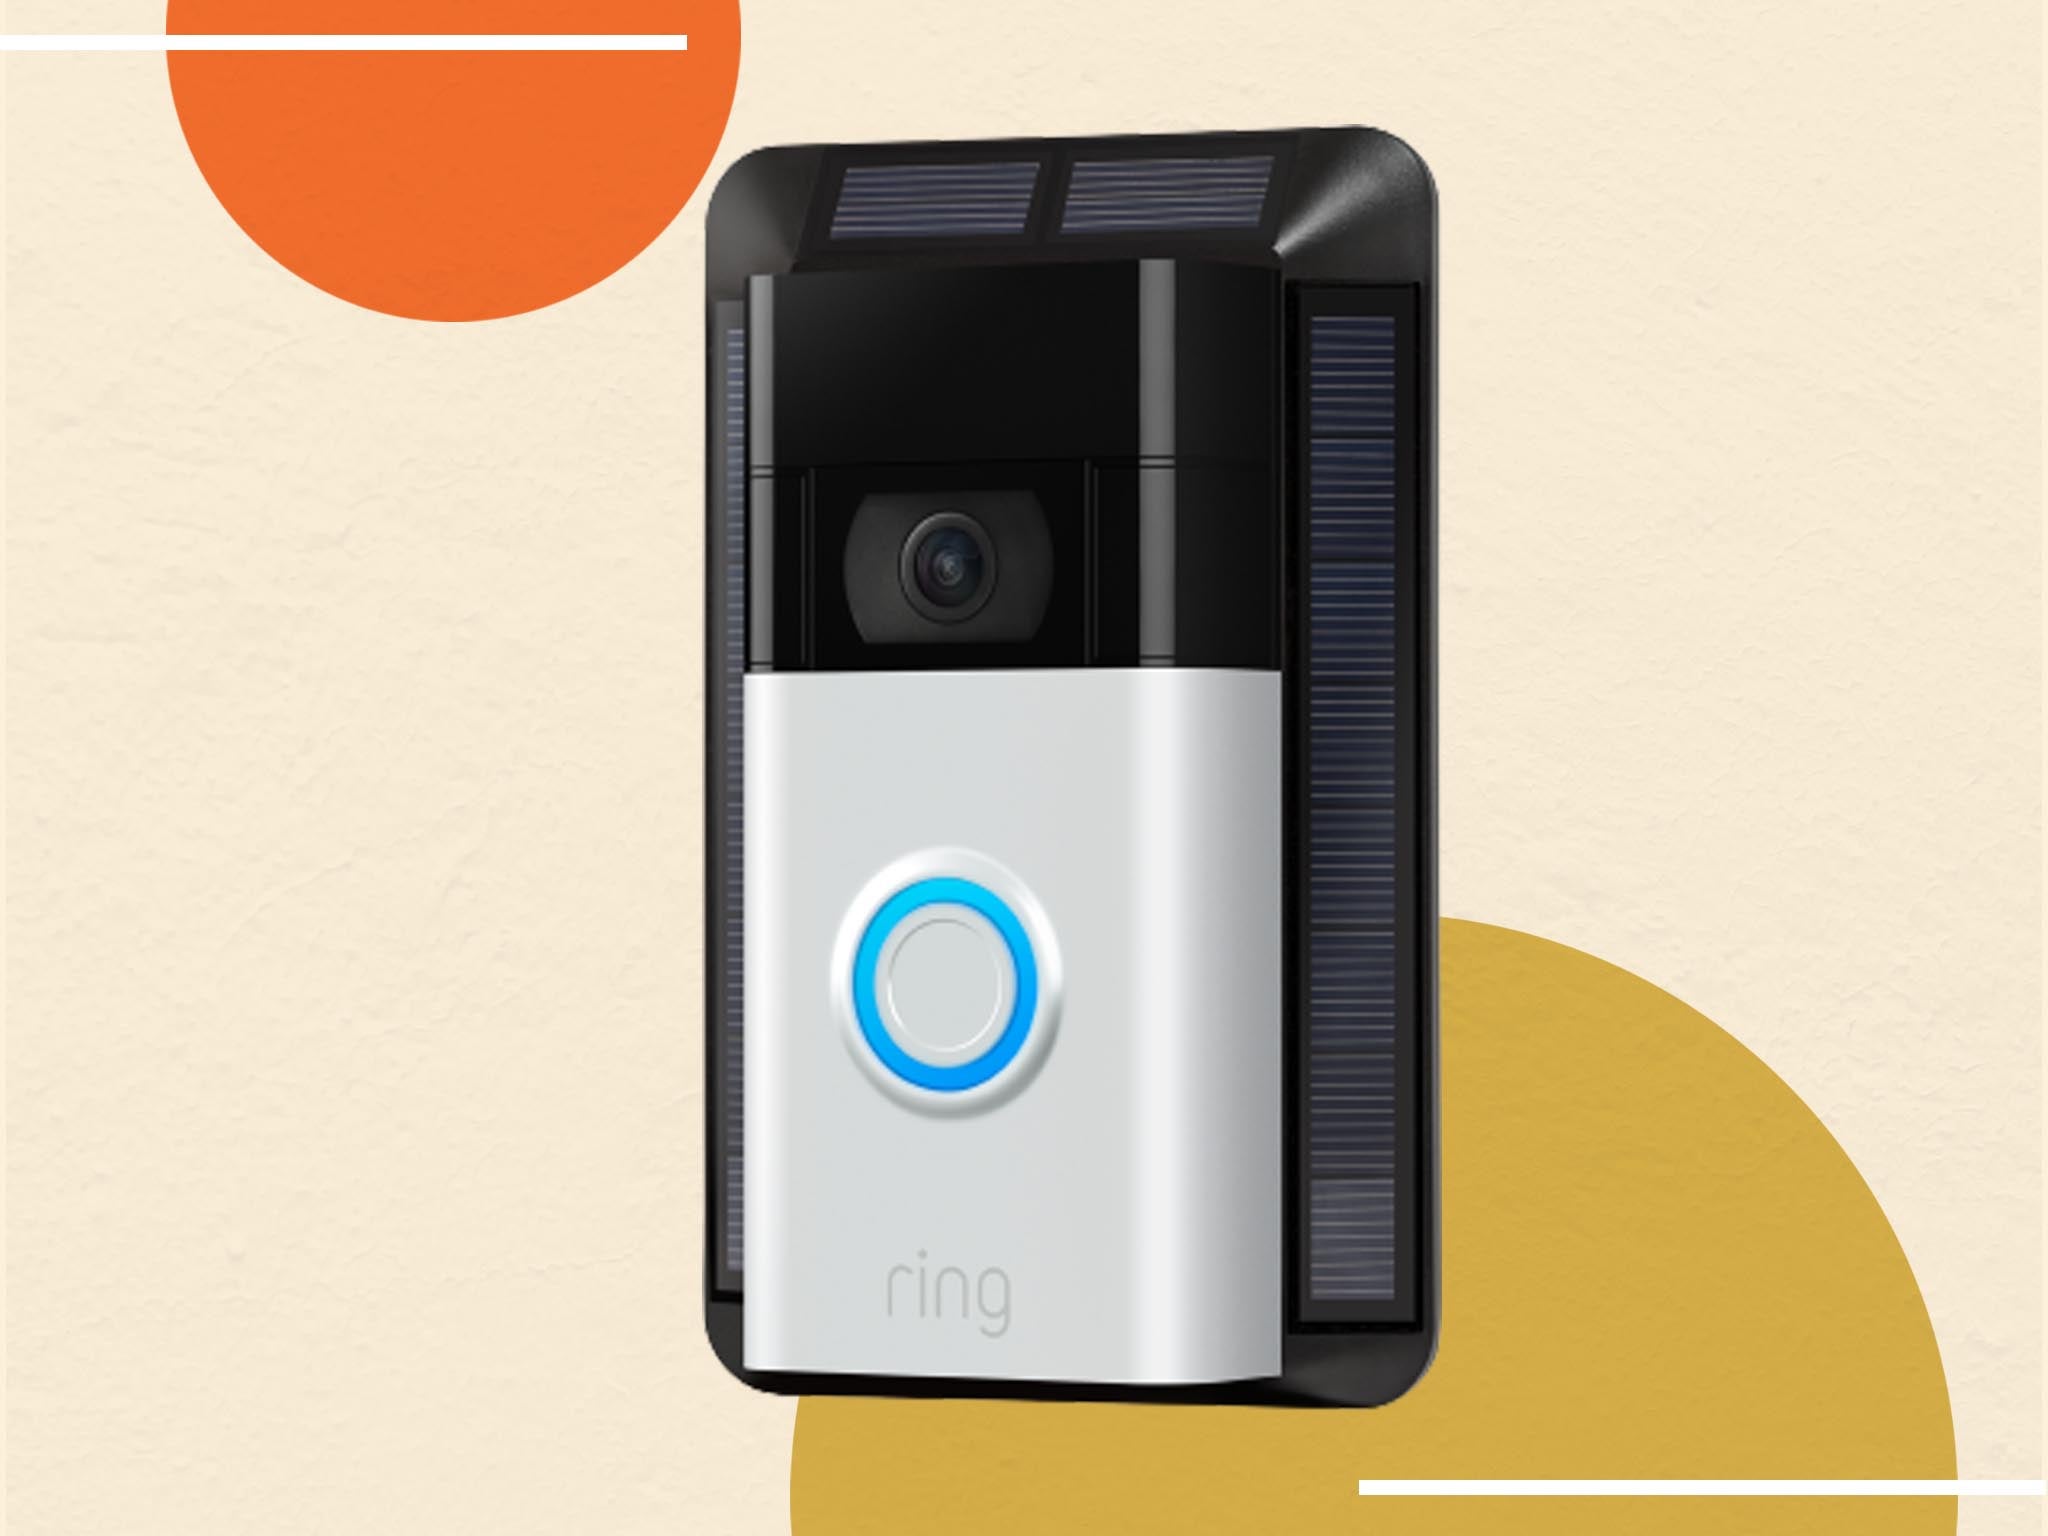 Ring doorbell solar charger review: From features to design | The